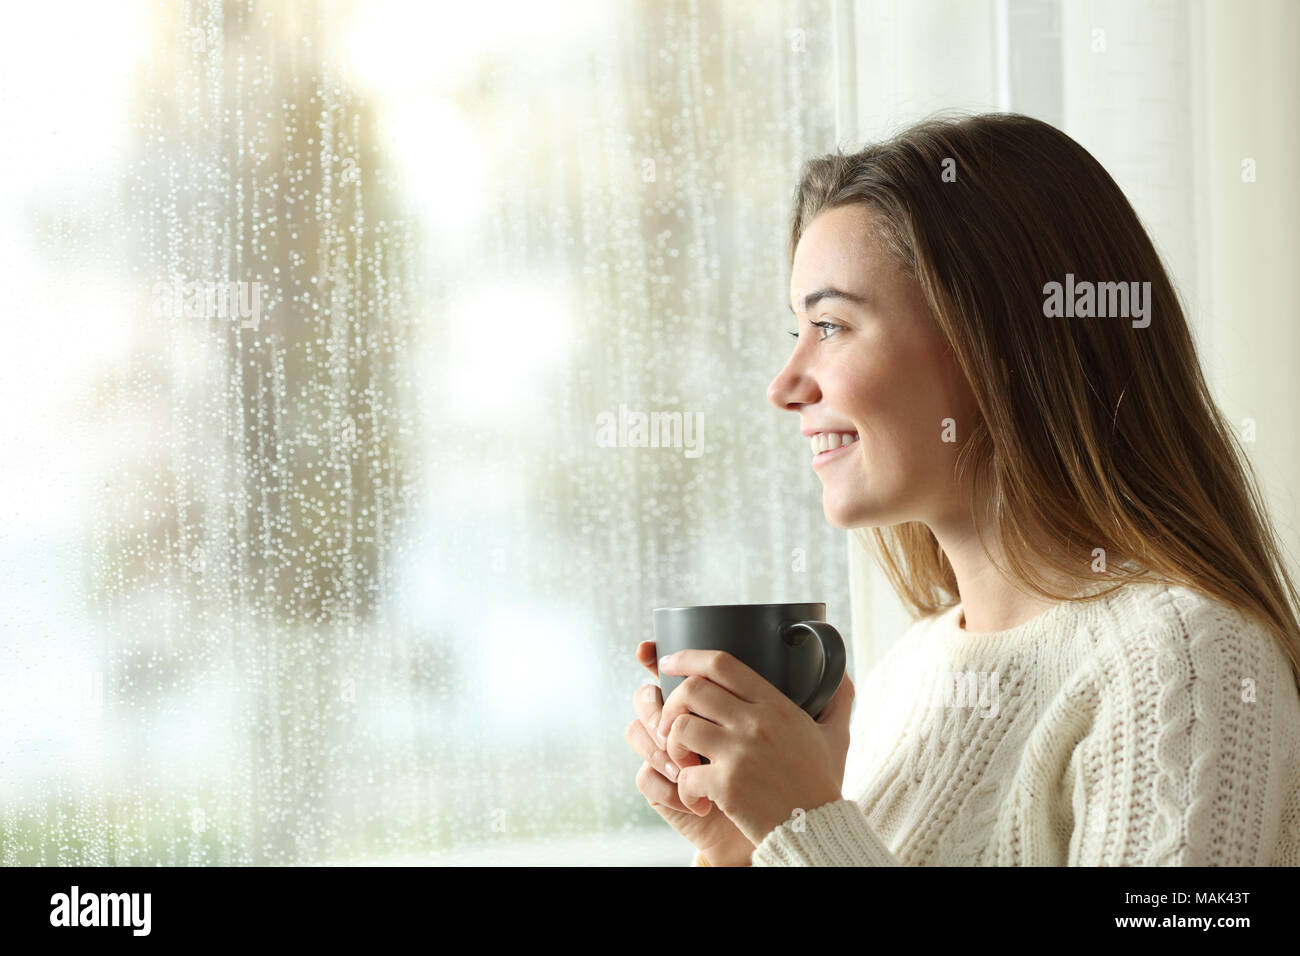 Happy teen holding a mug looking through a window at home in a rainy day Stock Photo